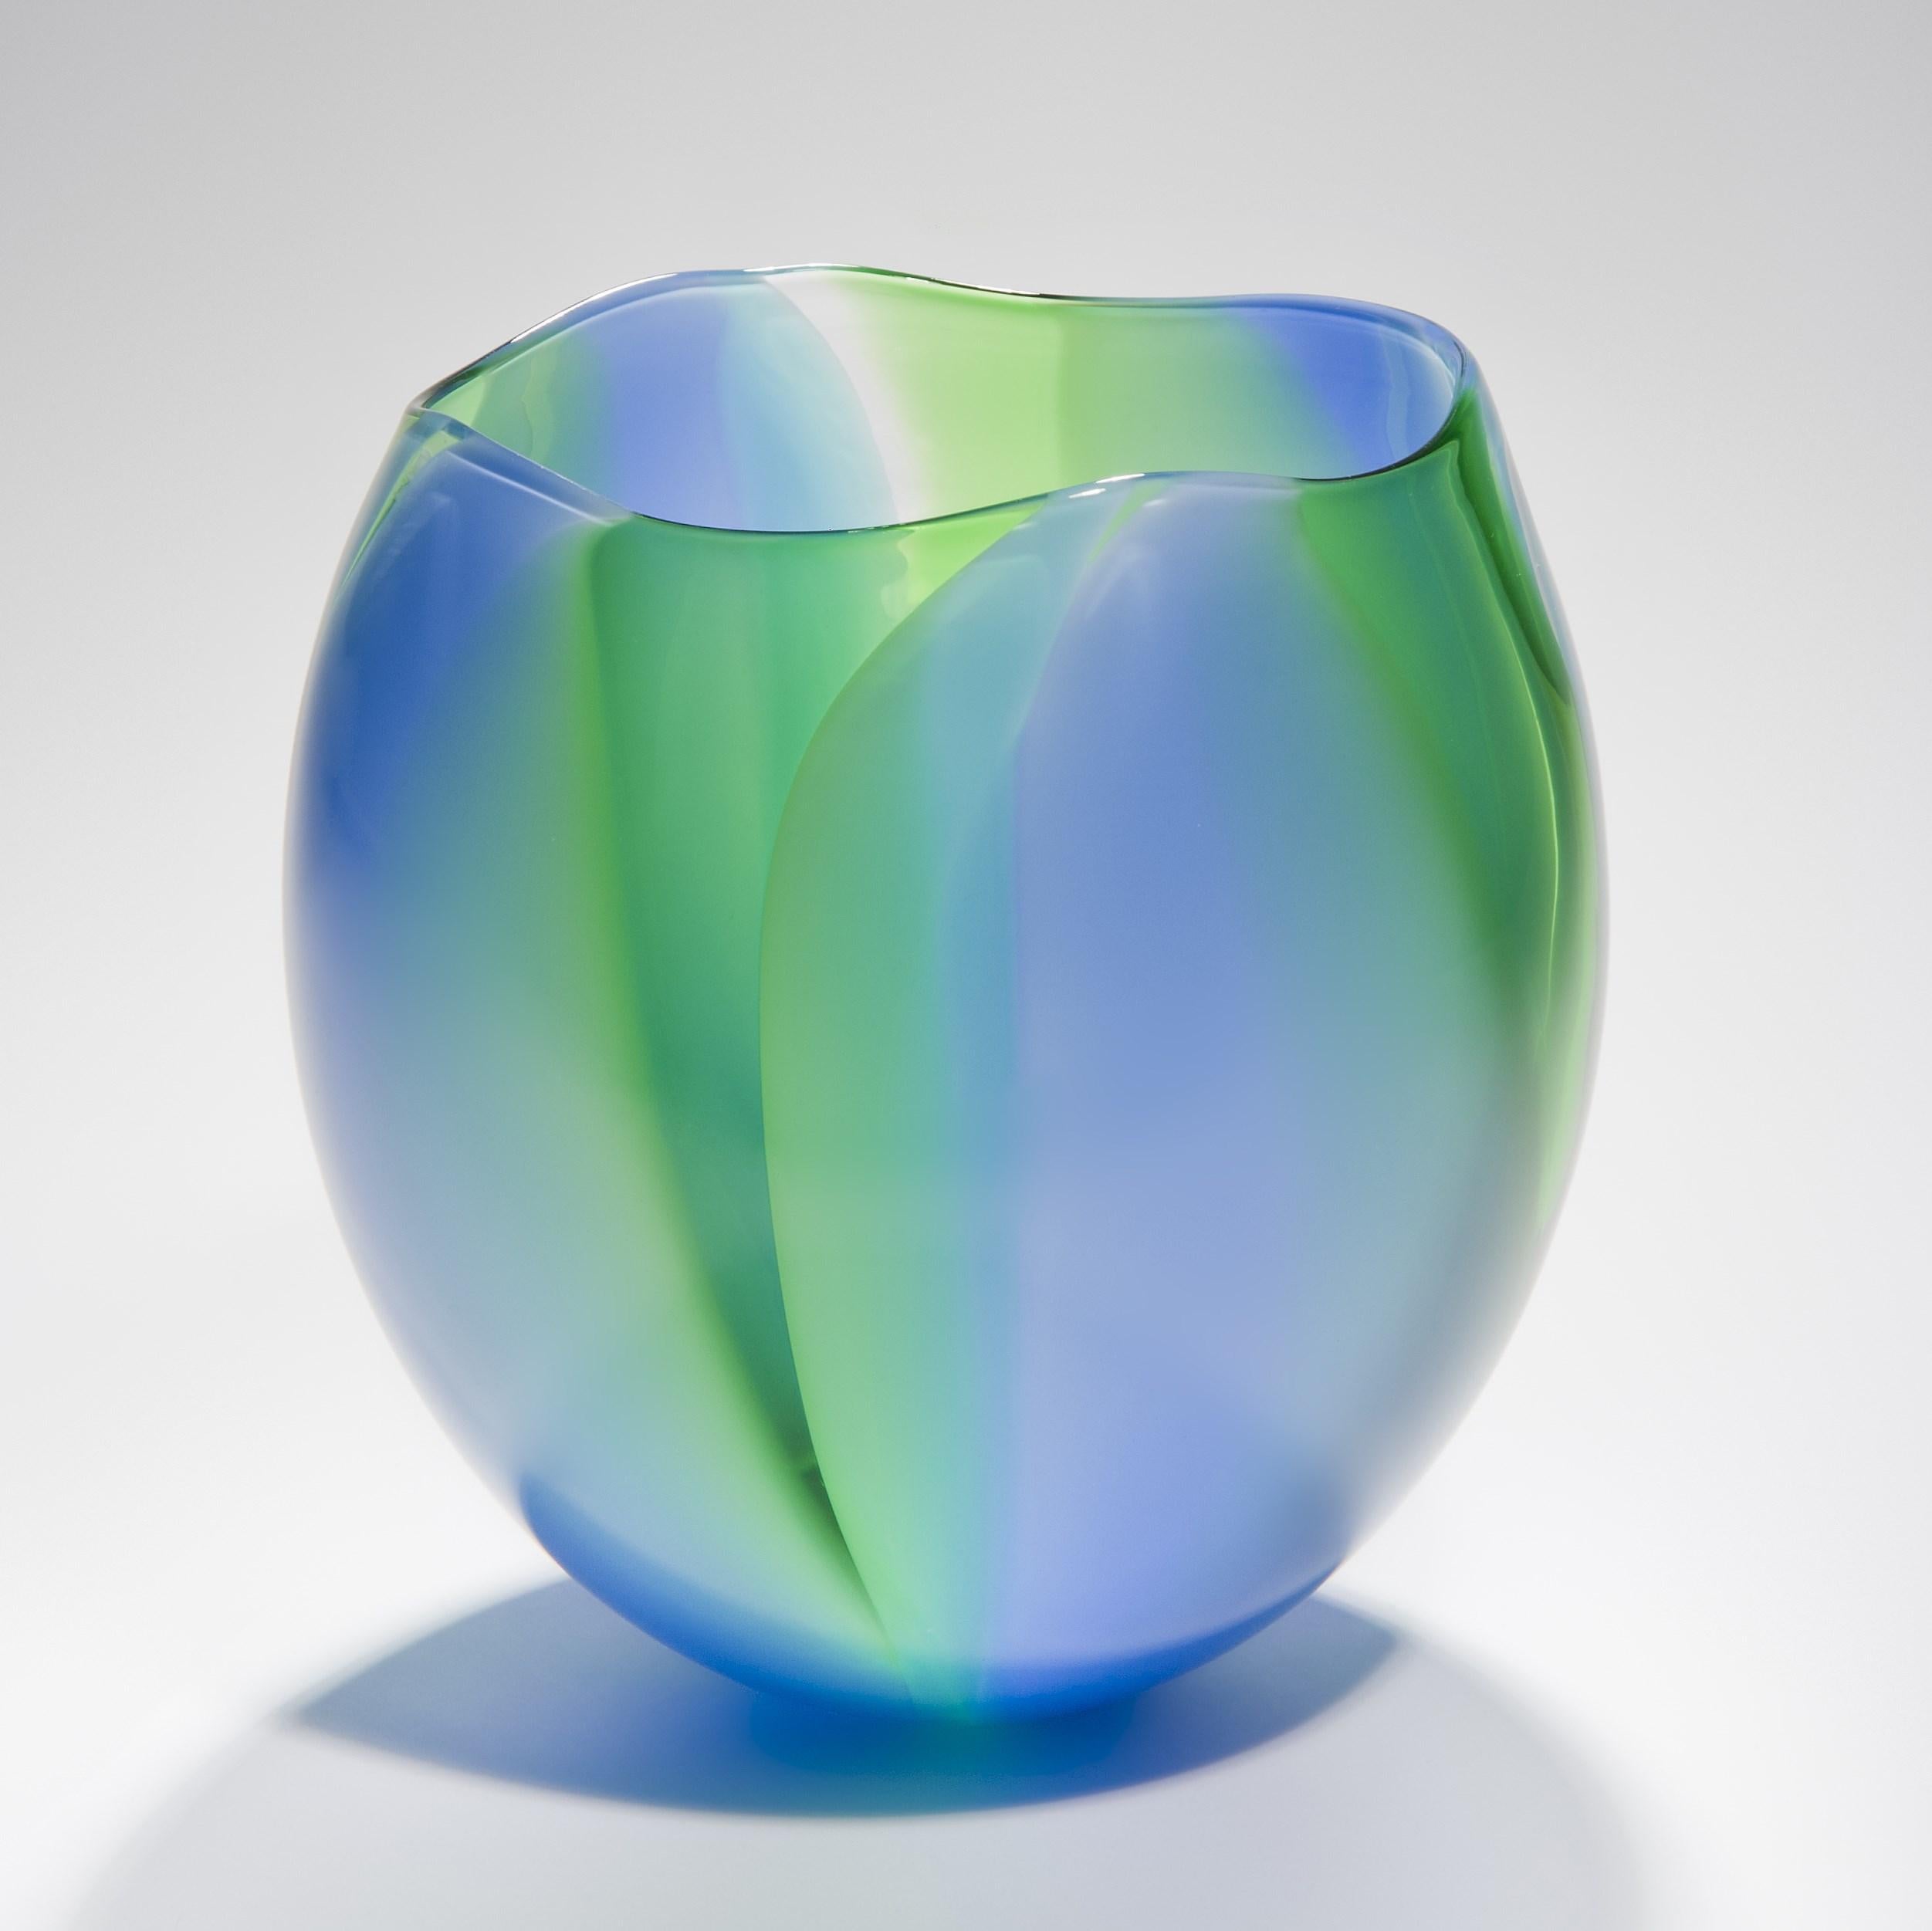 'Waves in blue & green' is a beautifully crafted, handblown glass bowl by the British artist, Neil Wilkin.

'Waves' is a collection of beautifully crafted, unique glass bowls and centrepieces by the British artist Neil Wilkin. Taking a painterly